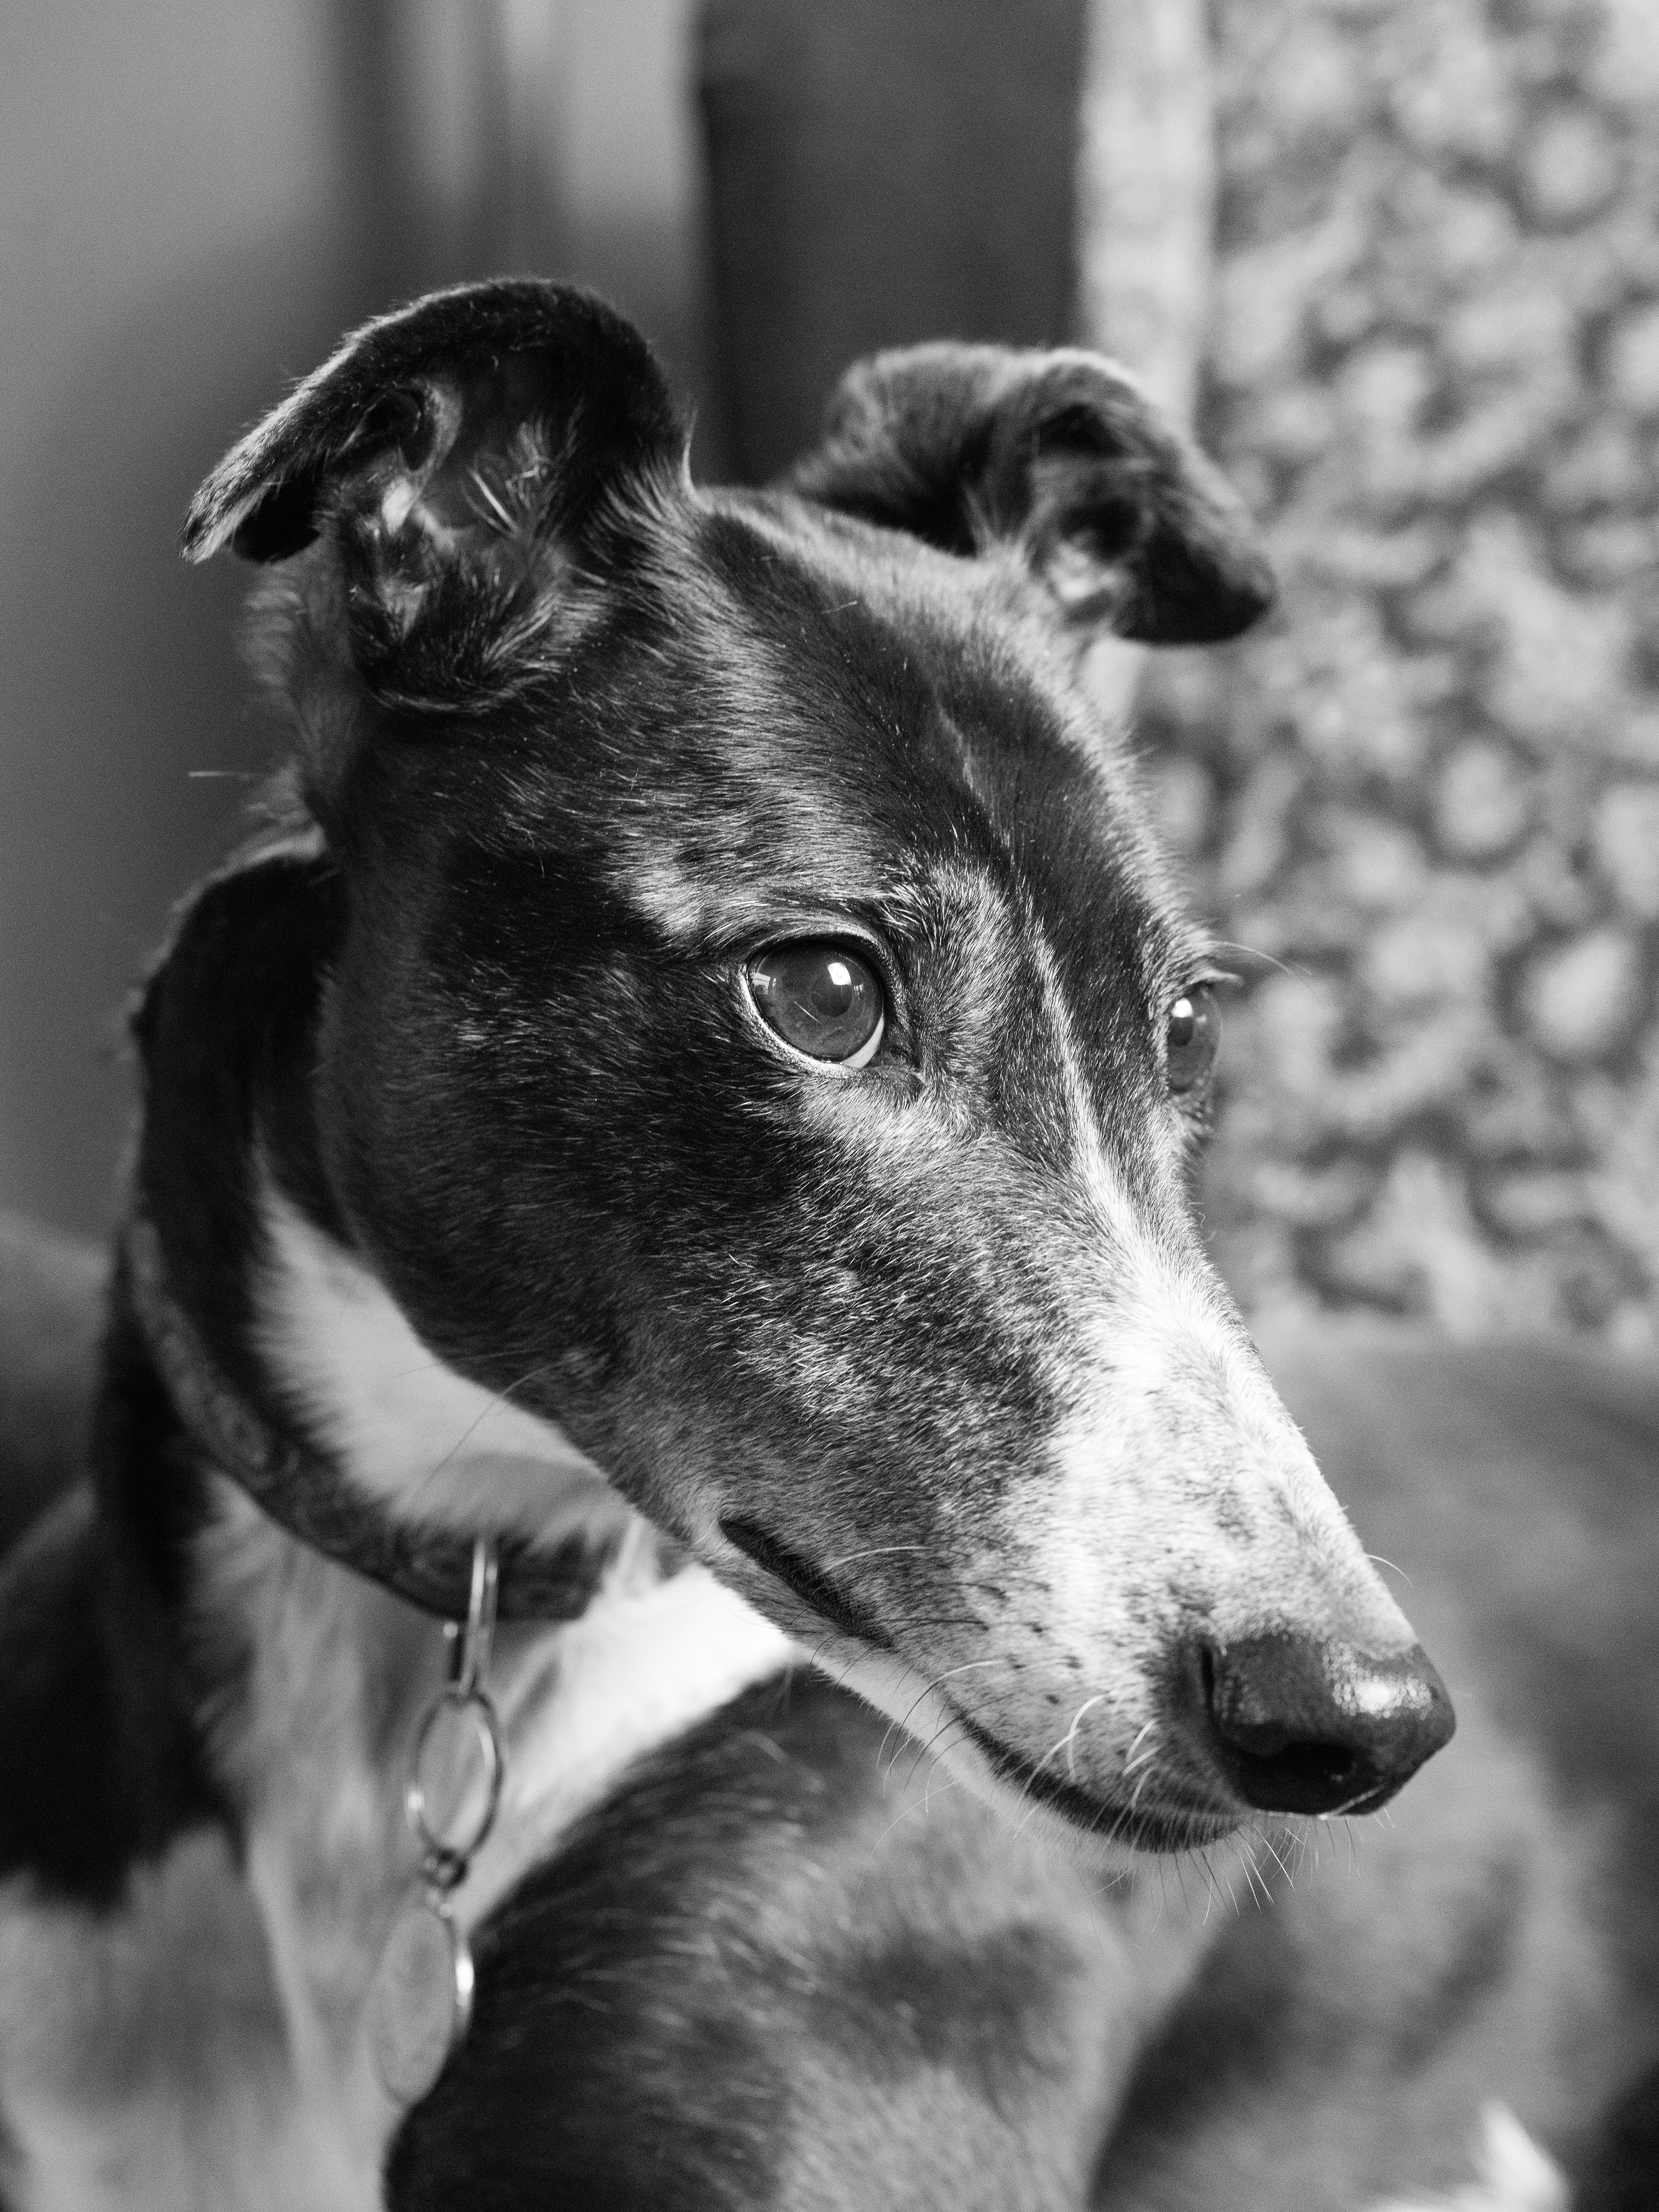 A photo of a greyhound in black and white.